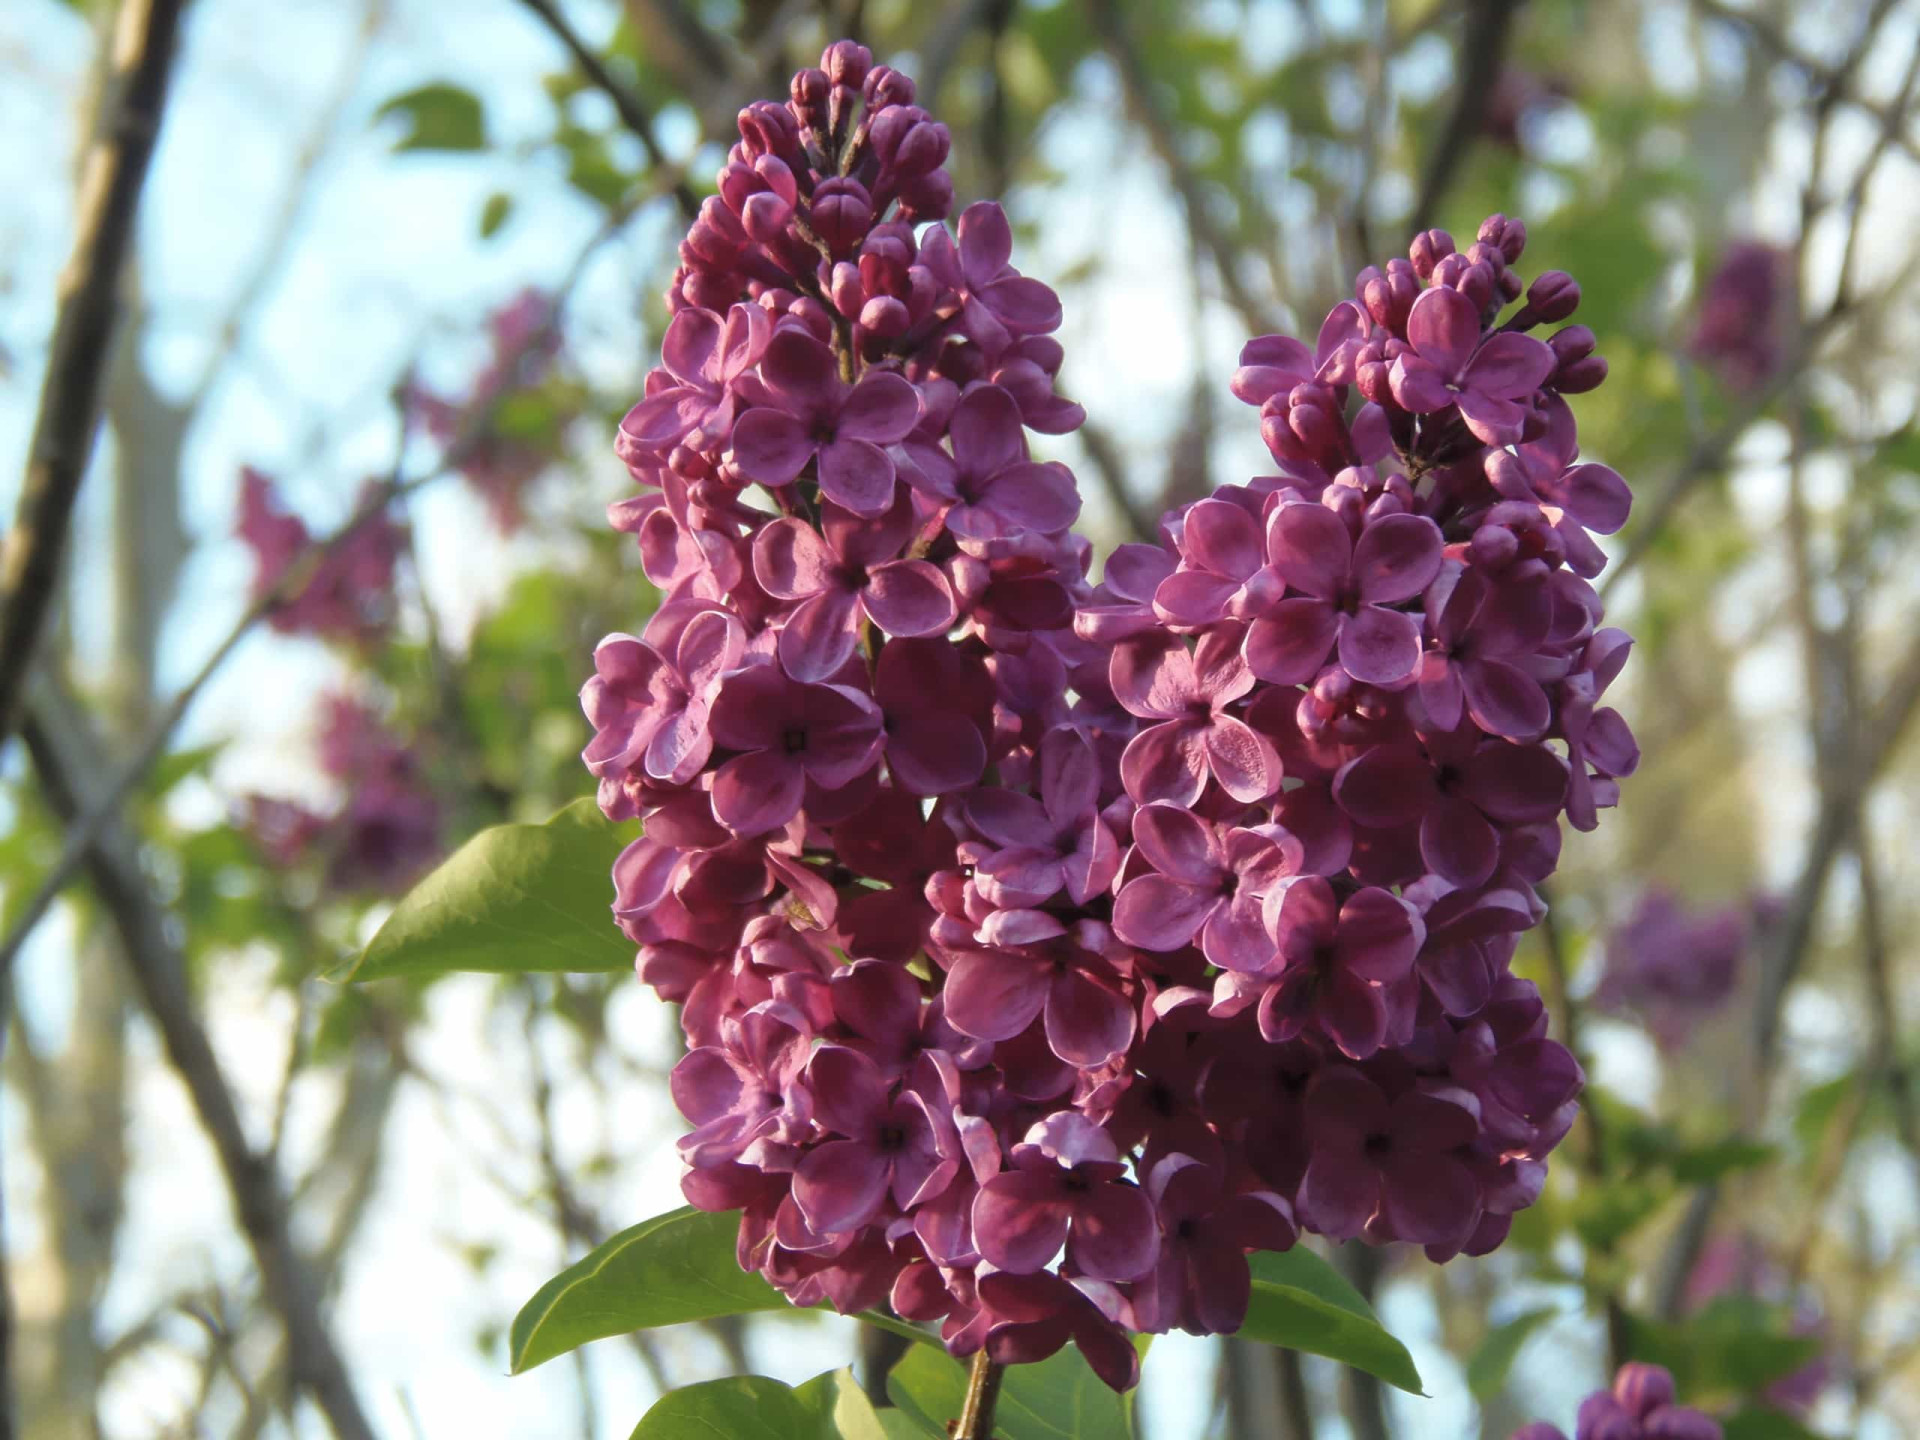 <p>The annual Lilac Festival is much more than a celebration of this pretty bloom. Expect art, music, and food too. Needless to say, the sweet bouquet hanging over the Highland Park venue is intoxicating.</p><p><a href="https://www.msn.com/en-us/community/channel/vid-7xx8mnucu55yw63we9va2gwr7uihbxwc68fxqp25x6tg4ftibpra?cvid=94631541bc0f4f89bfd59158d696ad7e">Follow us and access great exclusive content every day</a></p>